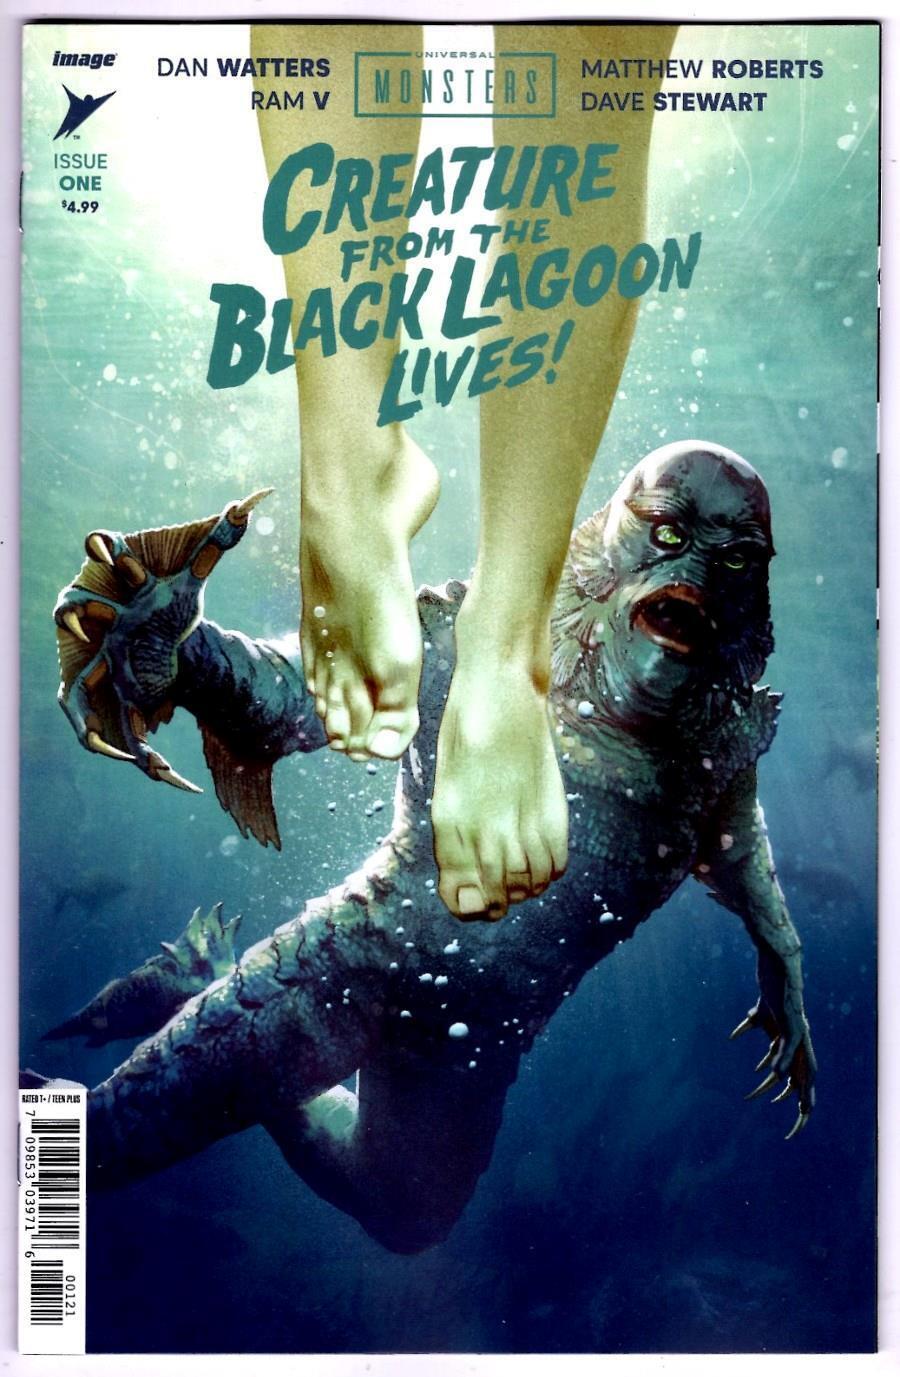 UNIVERSAL MONSTERS THE CREATURE FROM THE BLACK LAGOON LIVES #1 VARIANT MIDDLETON